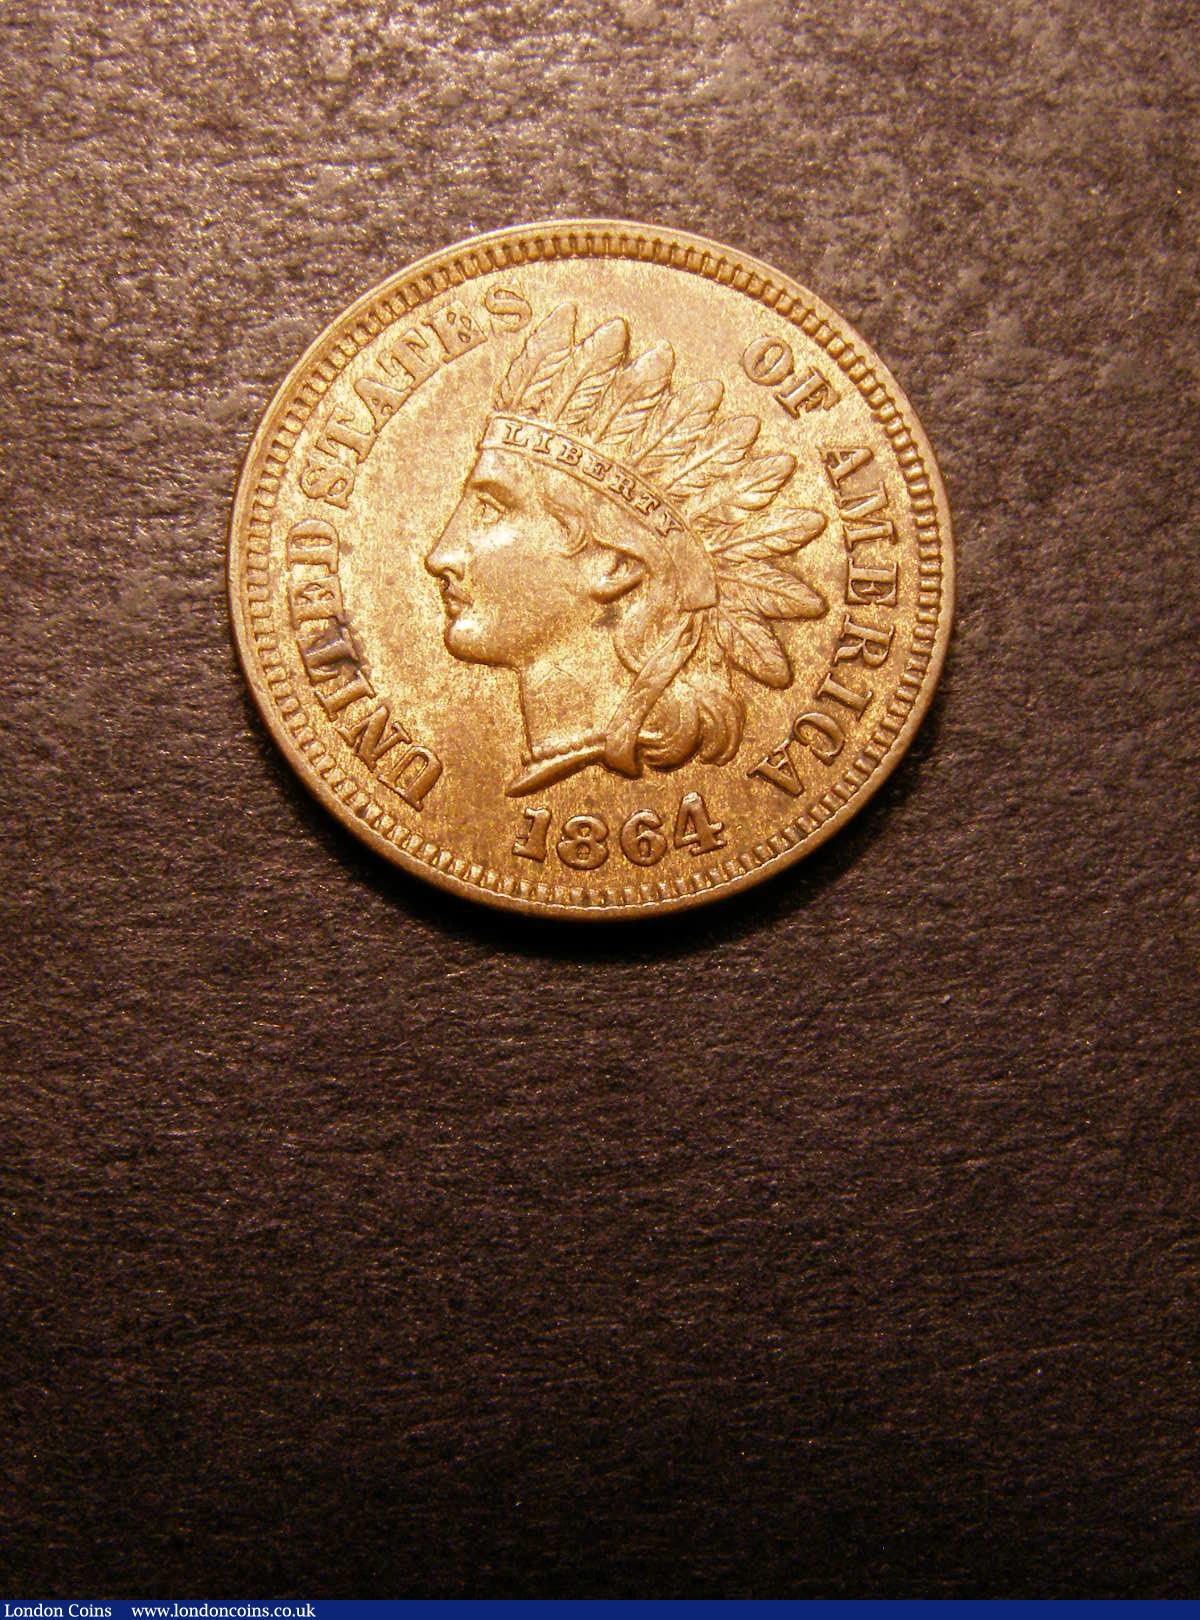 USA Cent 1864L with repunching on the date figures, unlisted by Breen, listed in 'Cherrypickers Guide to Rare Die Varieties' by Fivaz and Stanton FS#1c-006.72 EF with some small spots on the obverse, Rare, a popular variety among Indian Cent Specialists : World Coins : Auction 133 : Lot 1515